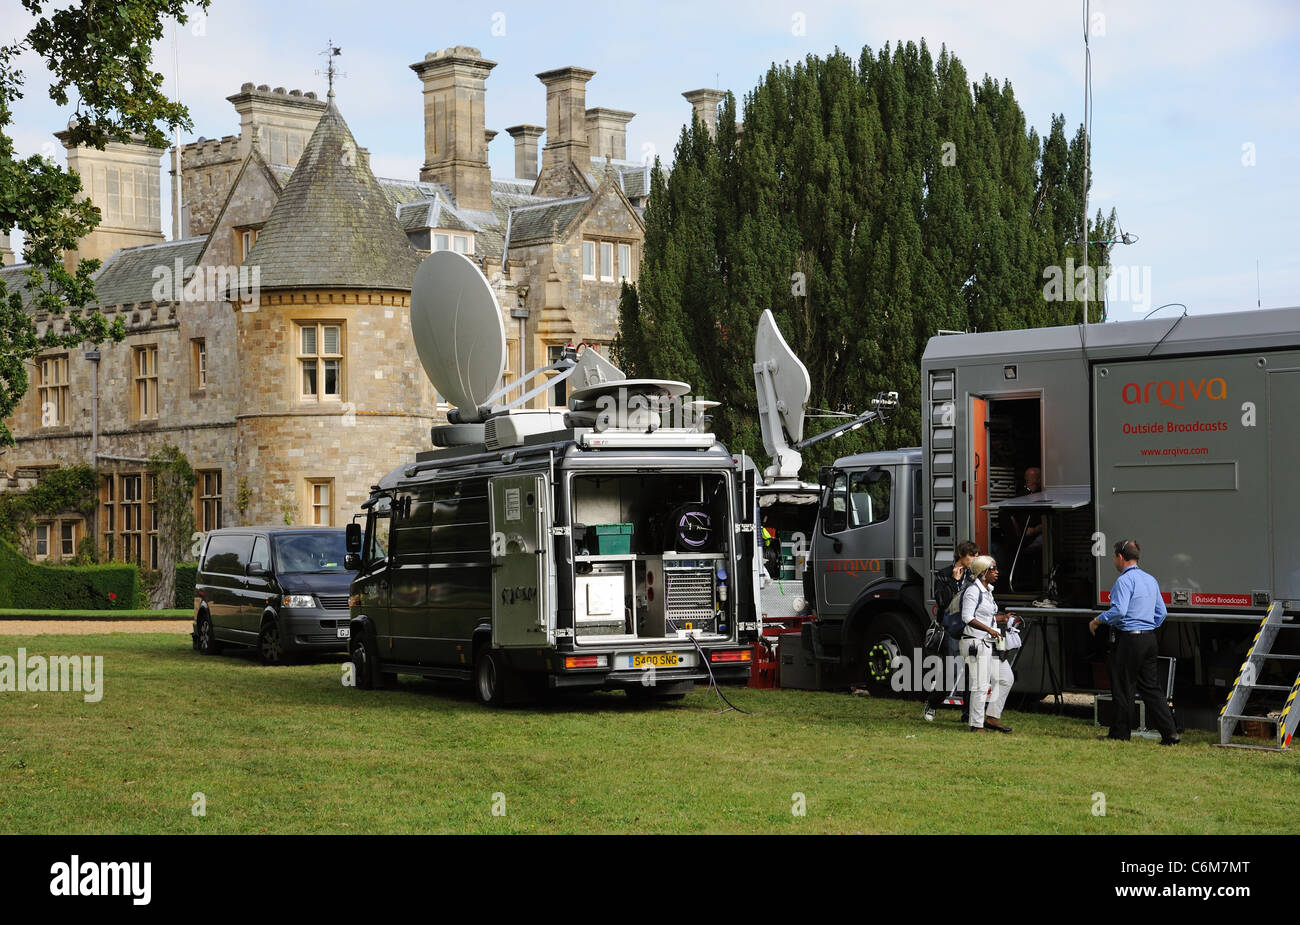 Outside broadcasting vans and equipment operated by the Arqiva company Stock  Photo - Alamy